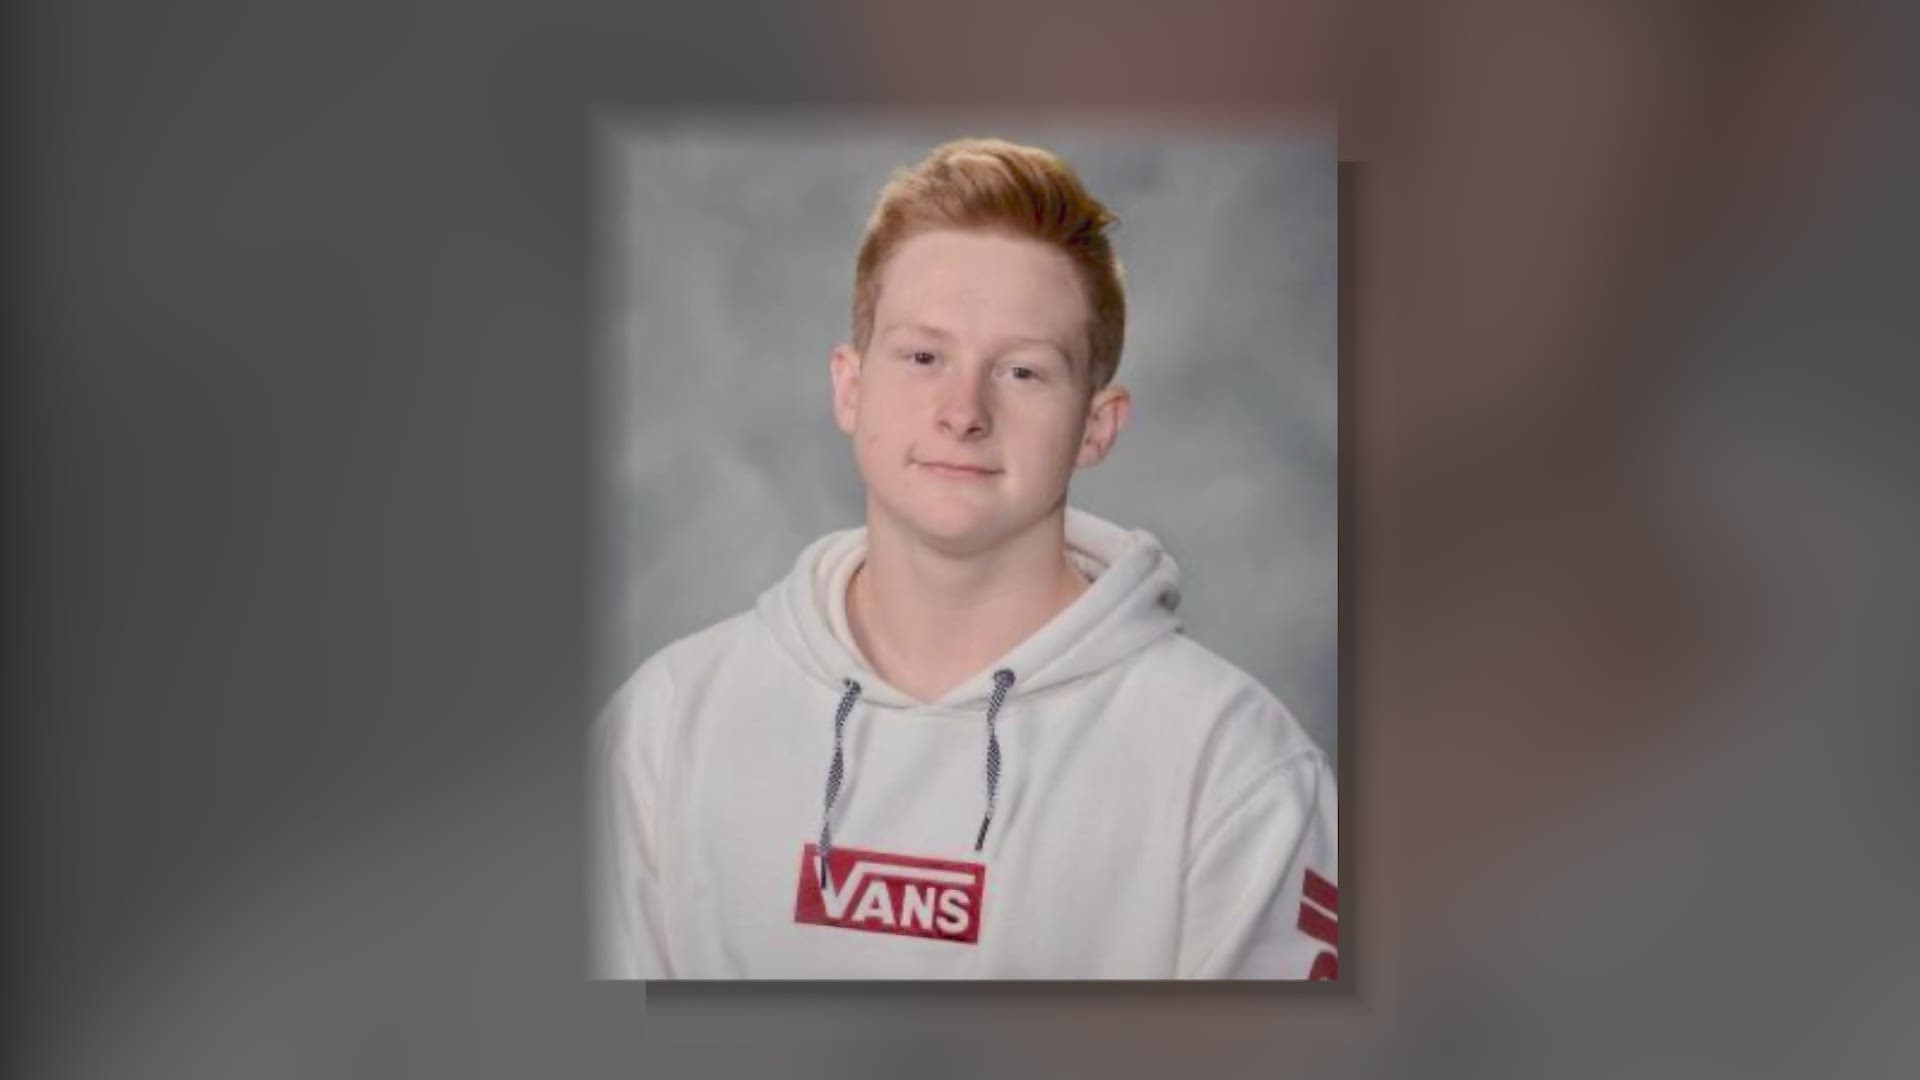 Luke Wright's mother says the 16-year-old Luke died after taking what he thought was a Percocet pill. But it was a counterfeit pill with fentanyl that cost $5.